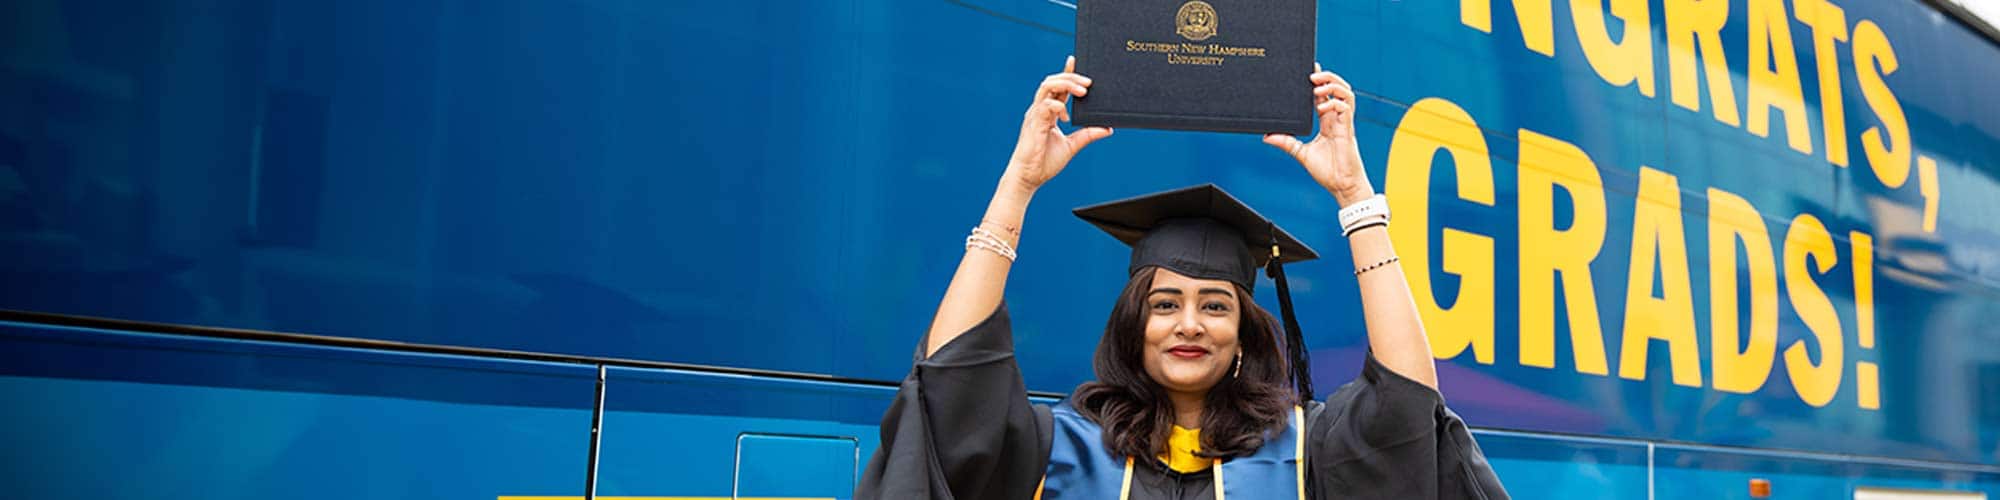 An SNHU grad in a cap and gown holding her diploma up in front of an SNHU branded bus